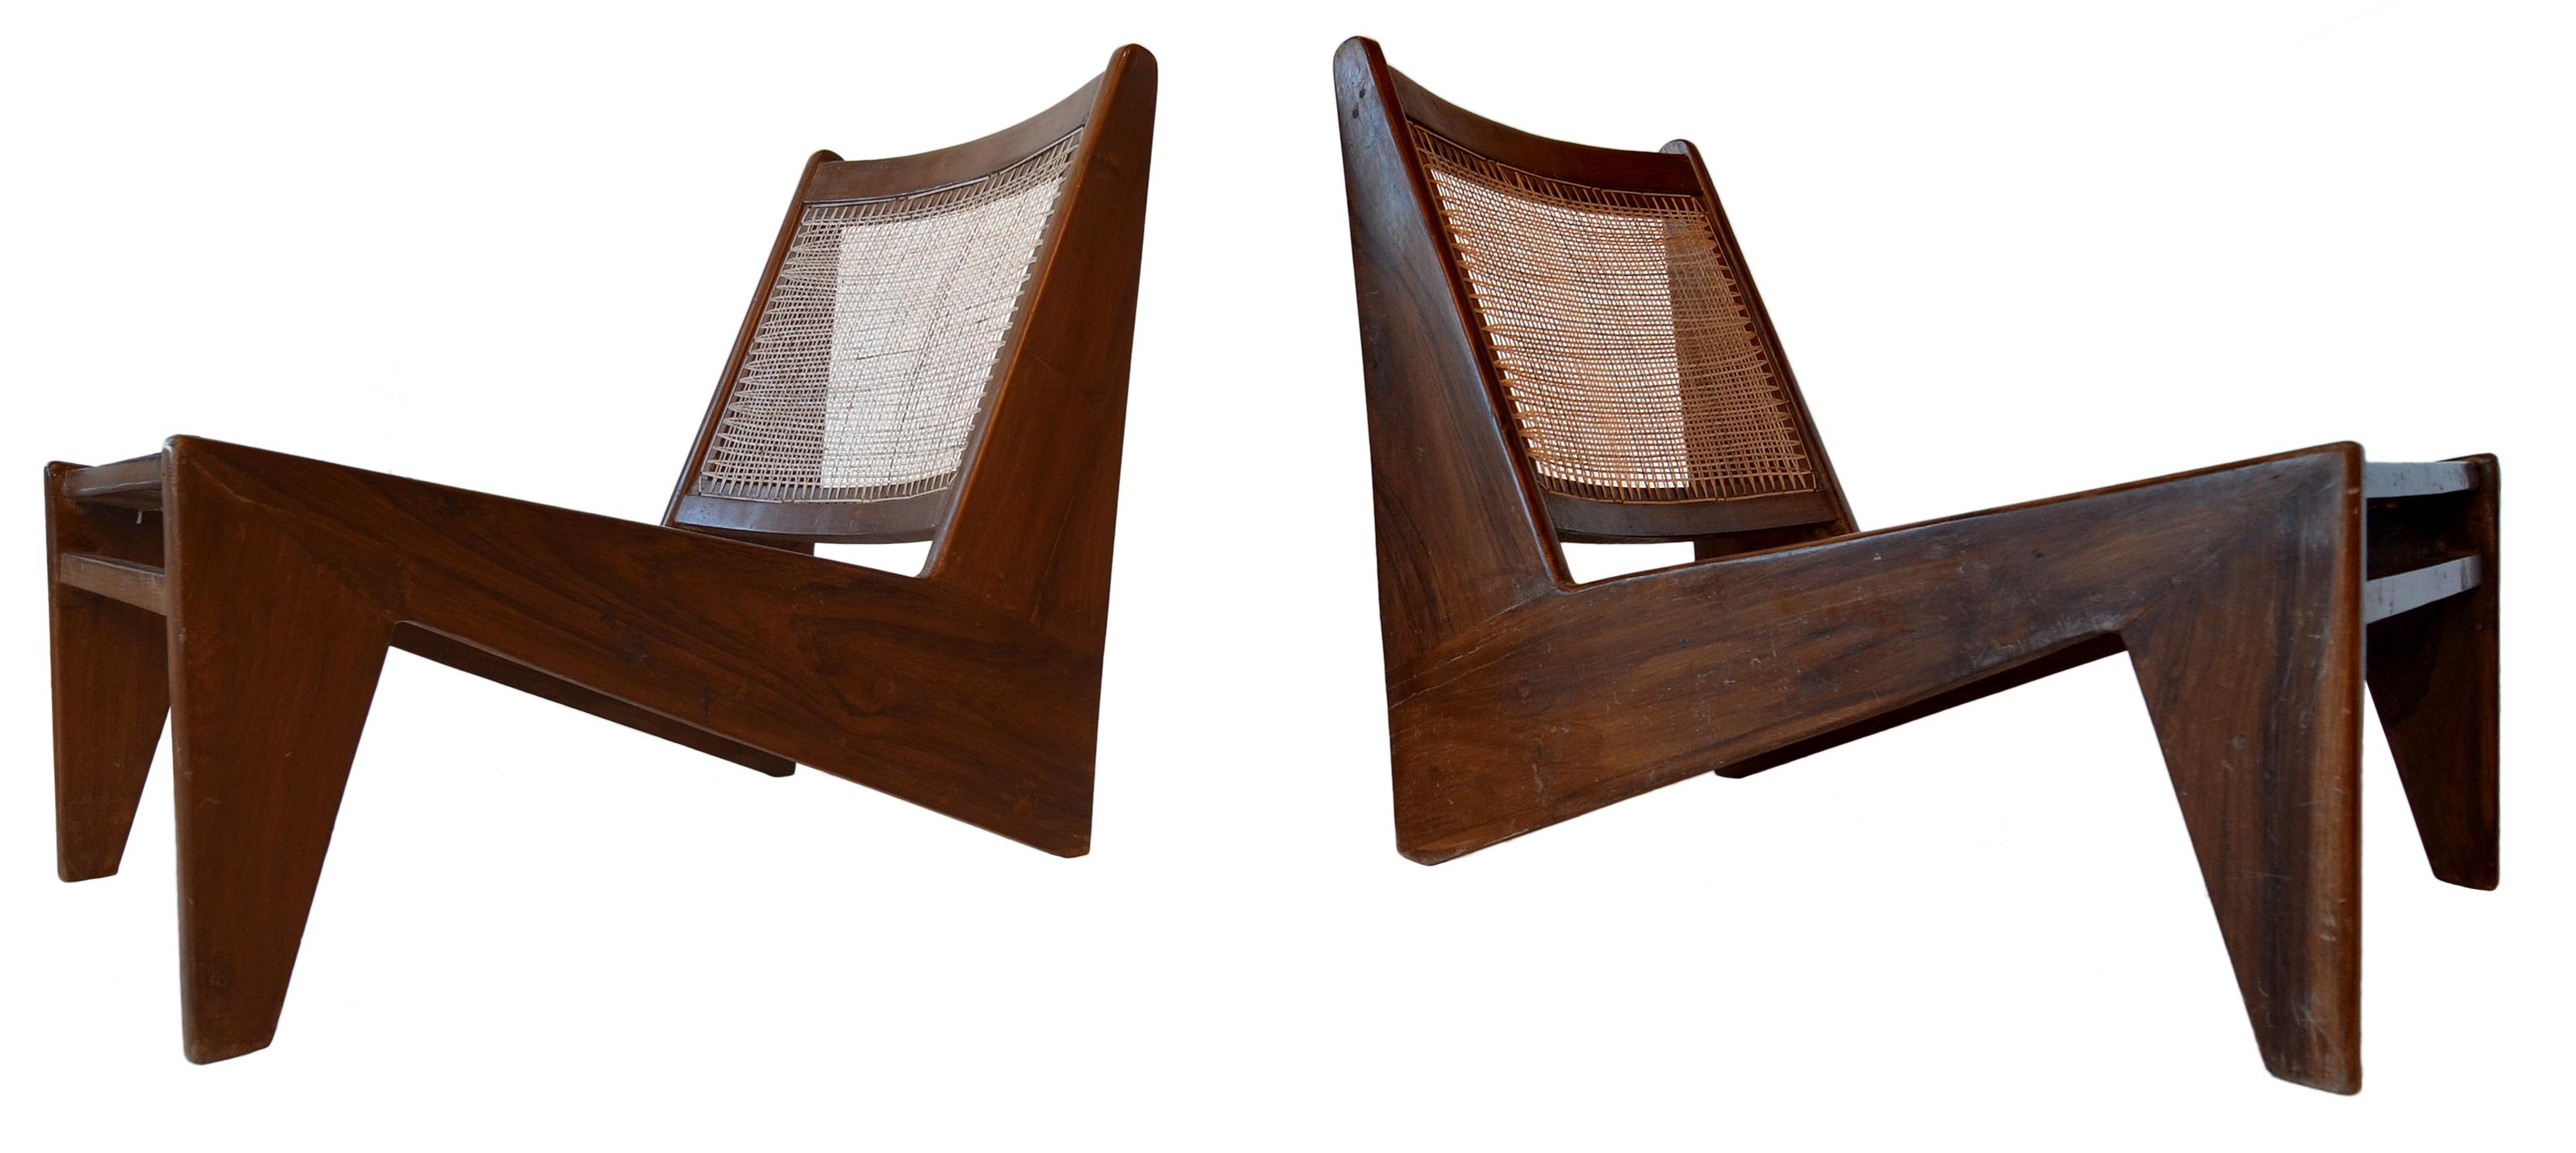 Indian Kangaroo Chairs by Pierre Jeanneret for the Chandigarh Project